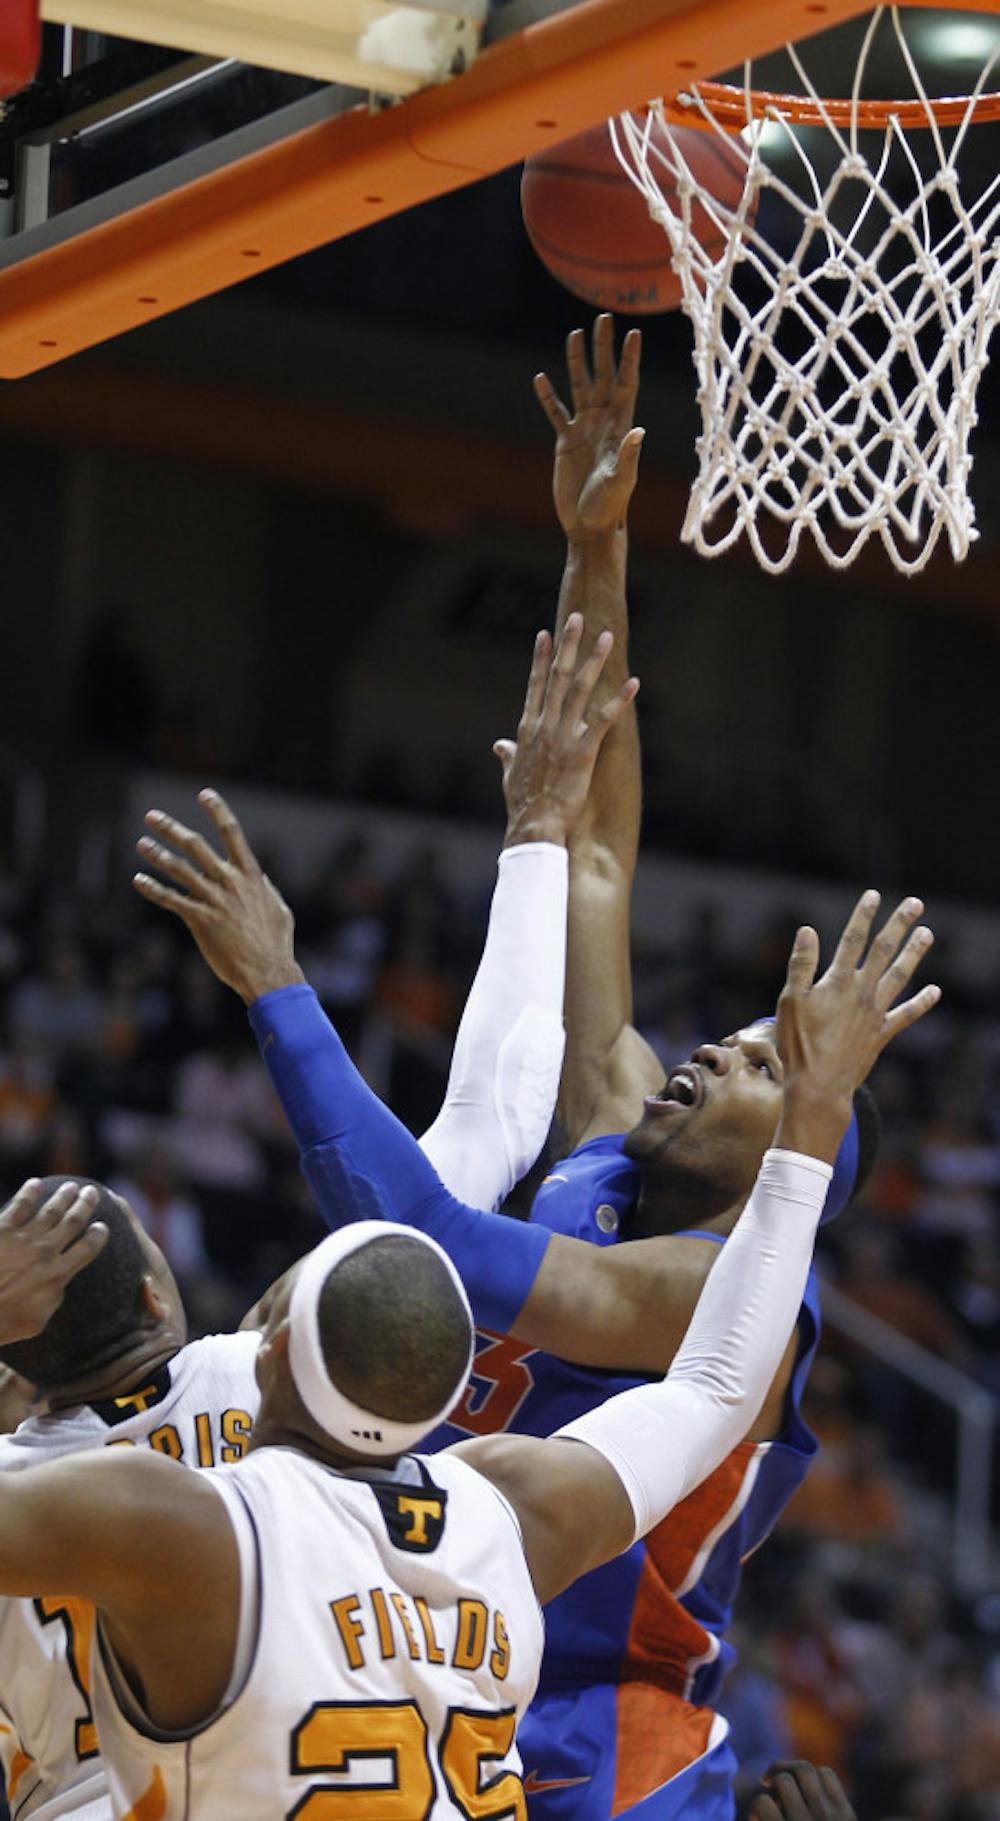 UF forward Alex Tyus shoots over Tennessee defenders during the Gators’ 81-75 overtime win in Knoxville, Tenn., on Tuesday night.